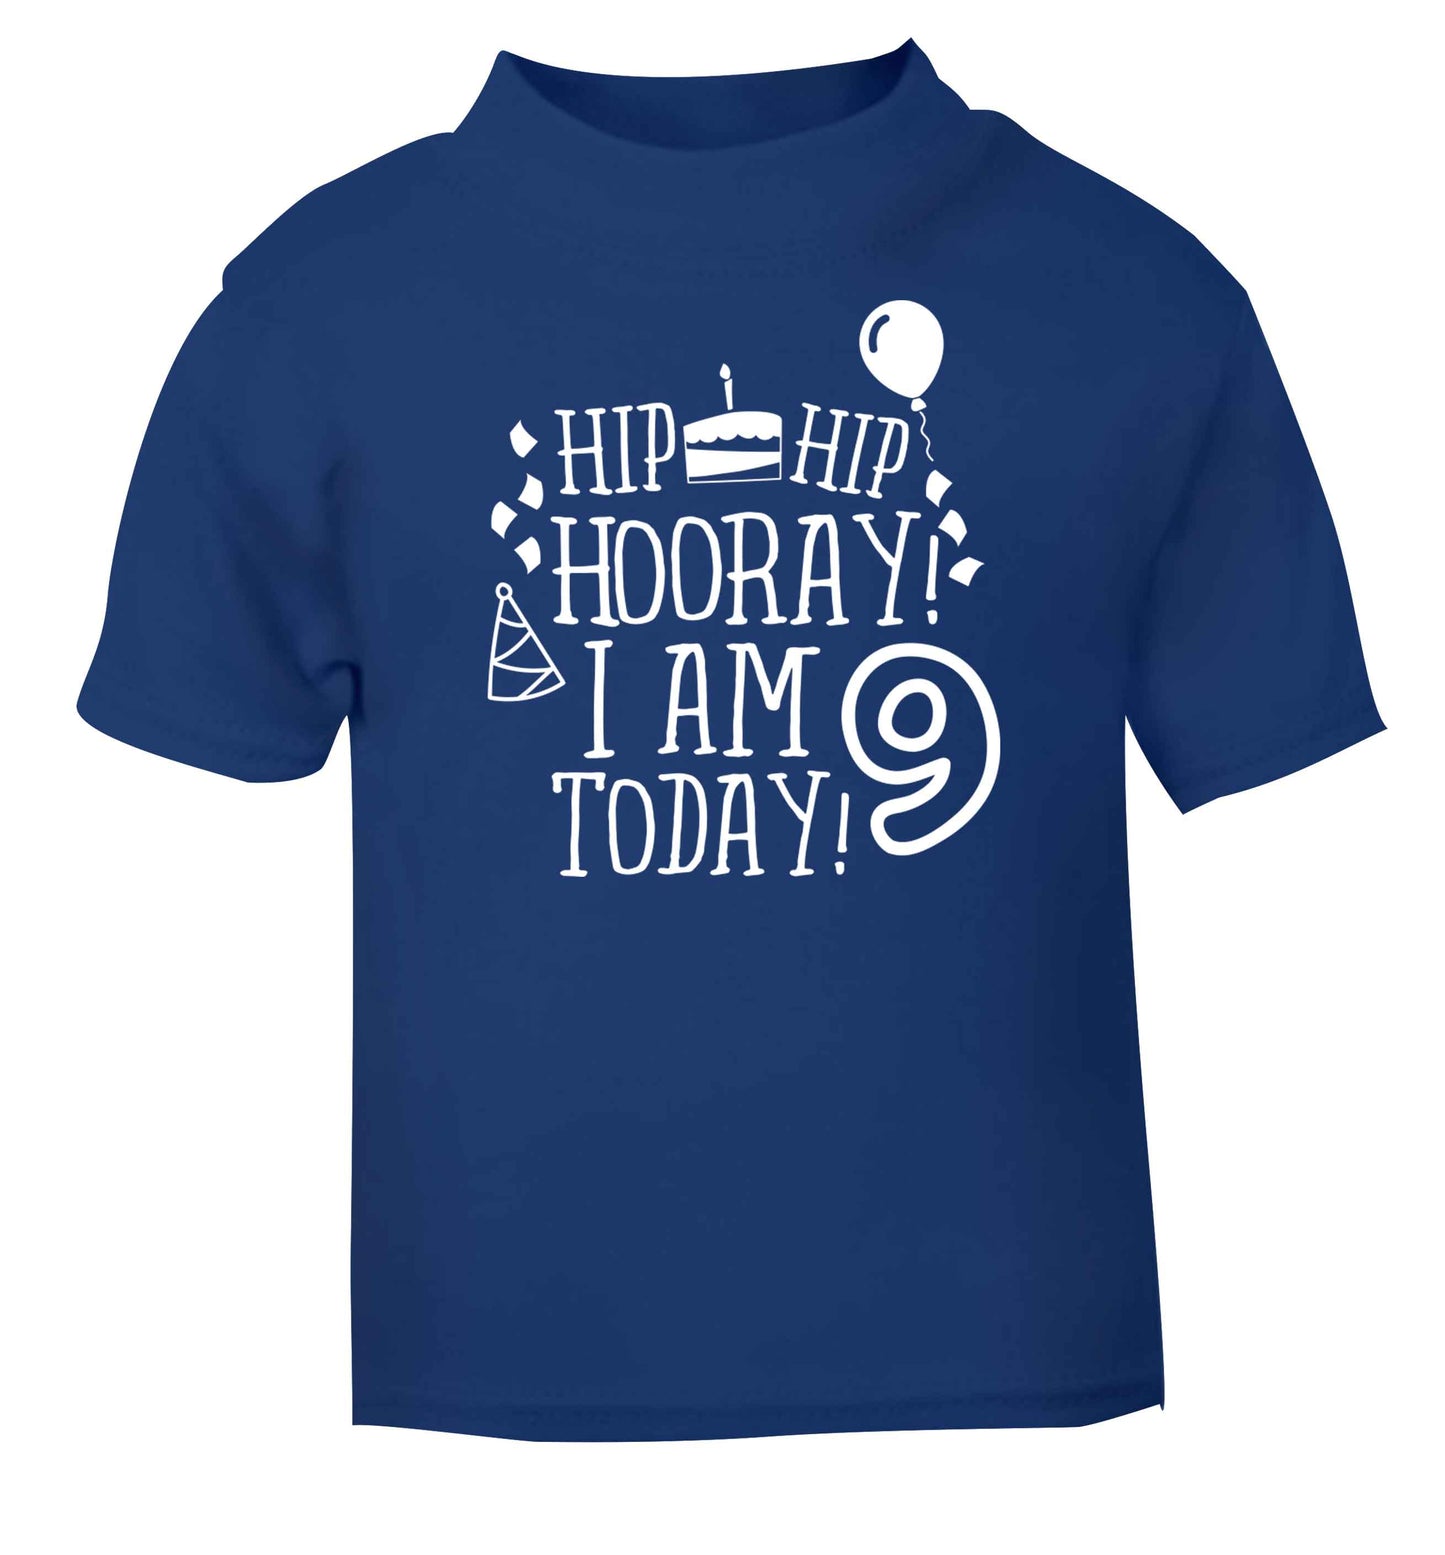 Hip hip hooray I am 9 today! blue baby toddler Tshirt 2 Years